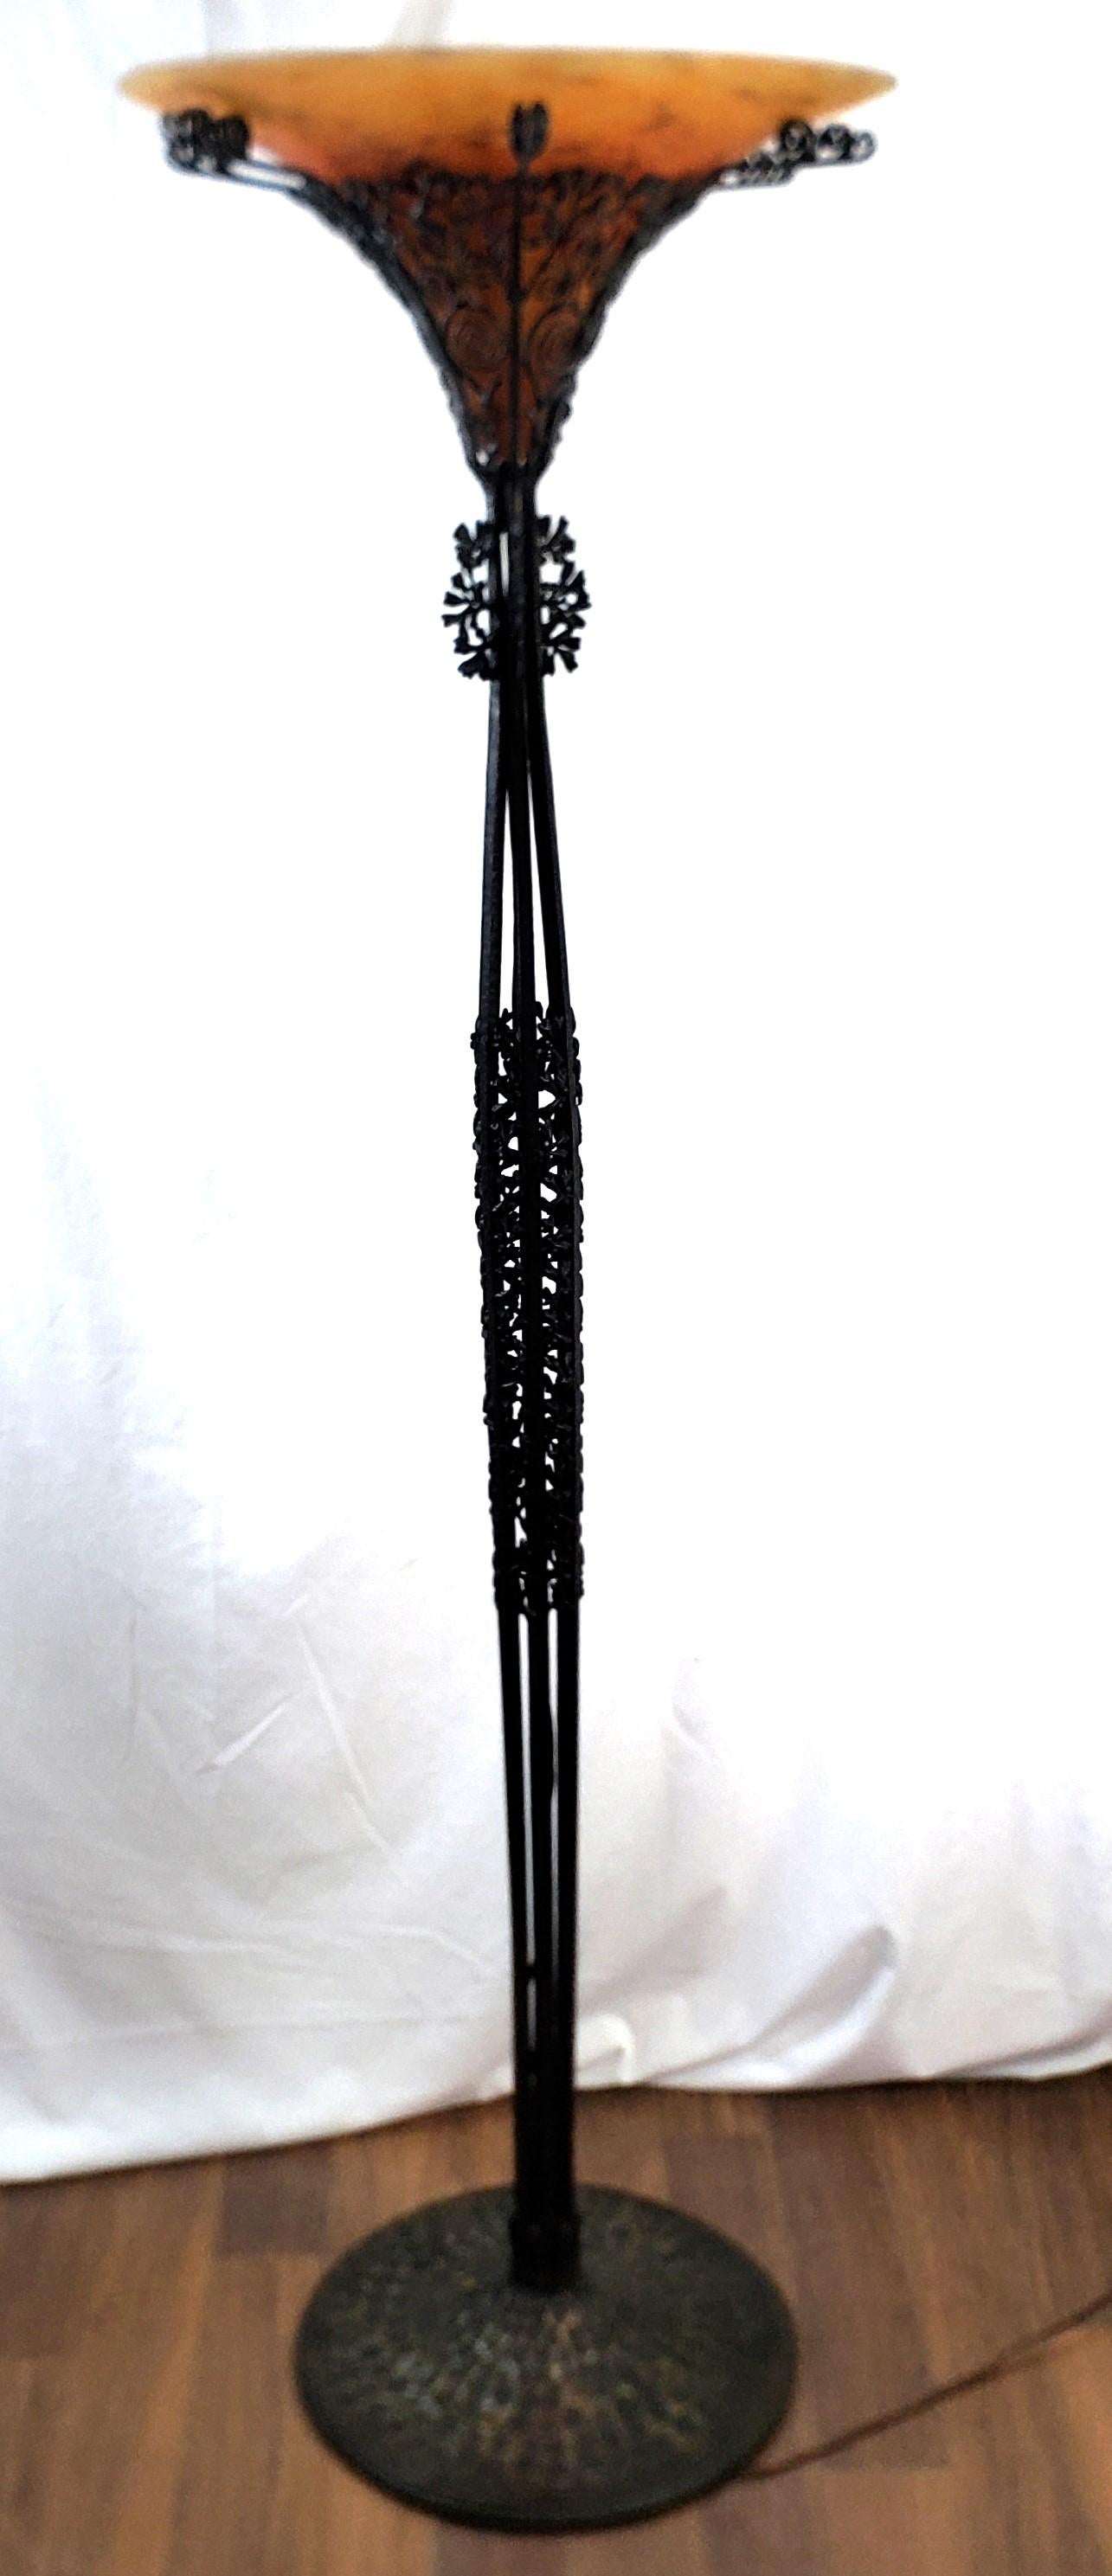 20th Century Edgar Brandt Signed & Daum Shade Antique French Art Deco Torchiere Floor Lamp  For Sale